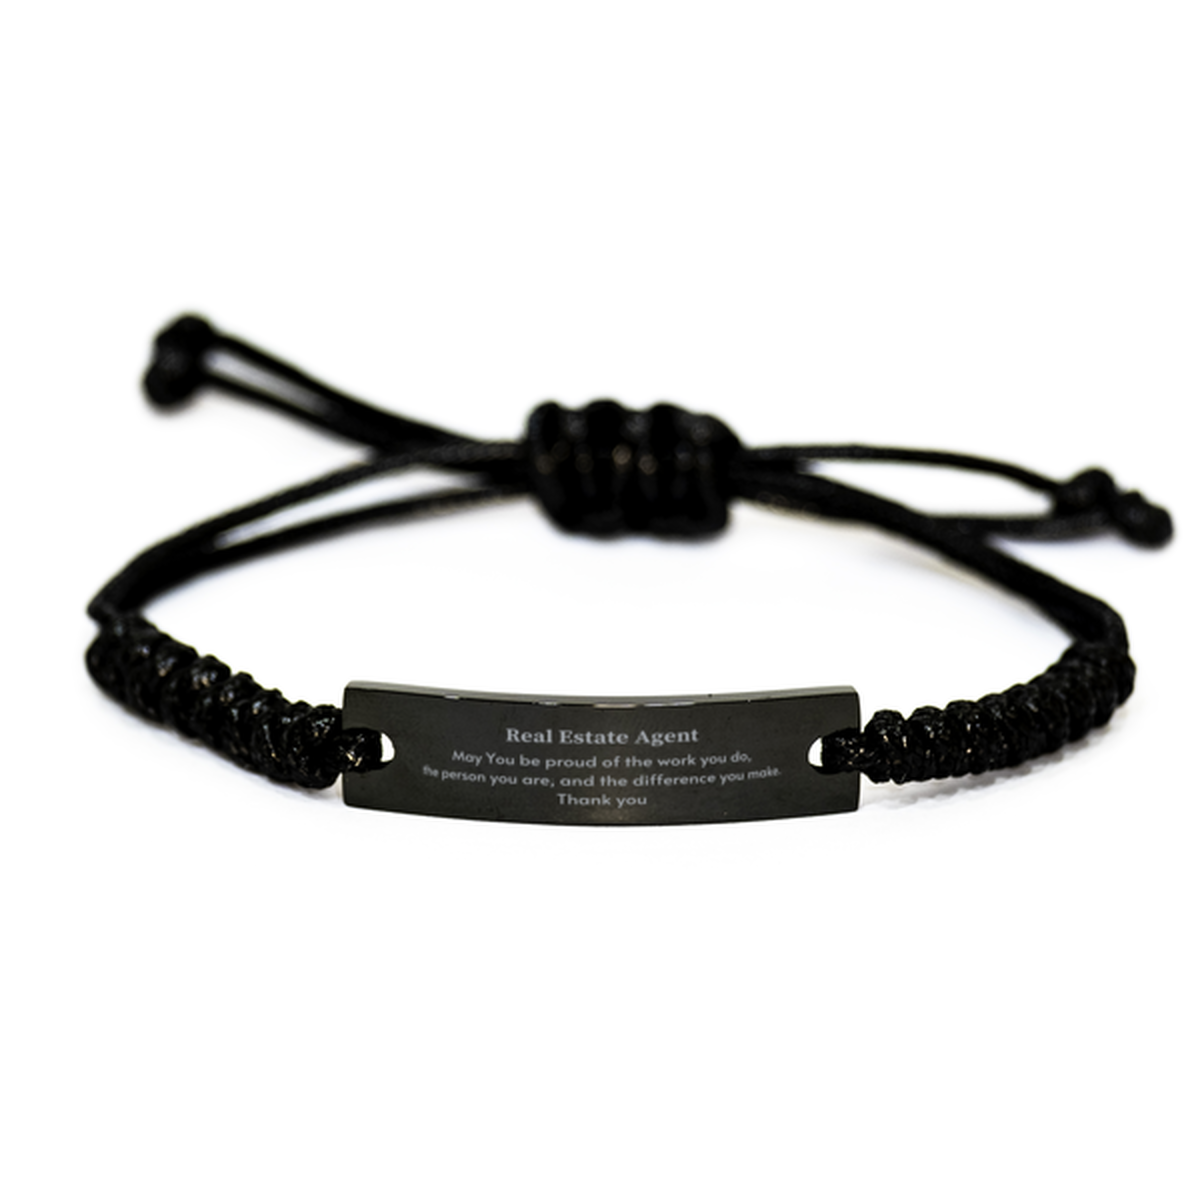 Heartwarming Black Rope Bracelet Retirement Coworkers Gifts for Real Estate Agent, Real Estate Agent May You be proud of the work you do, the person you are Gifts for Boss Men Women Friends